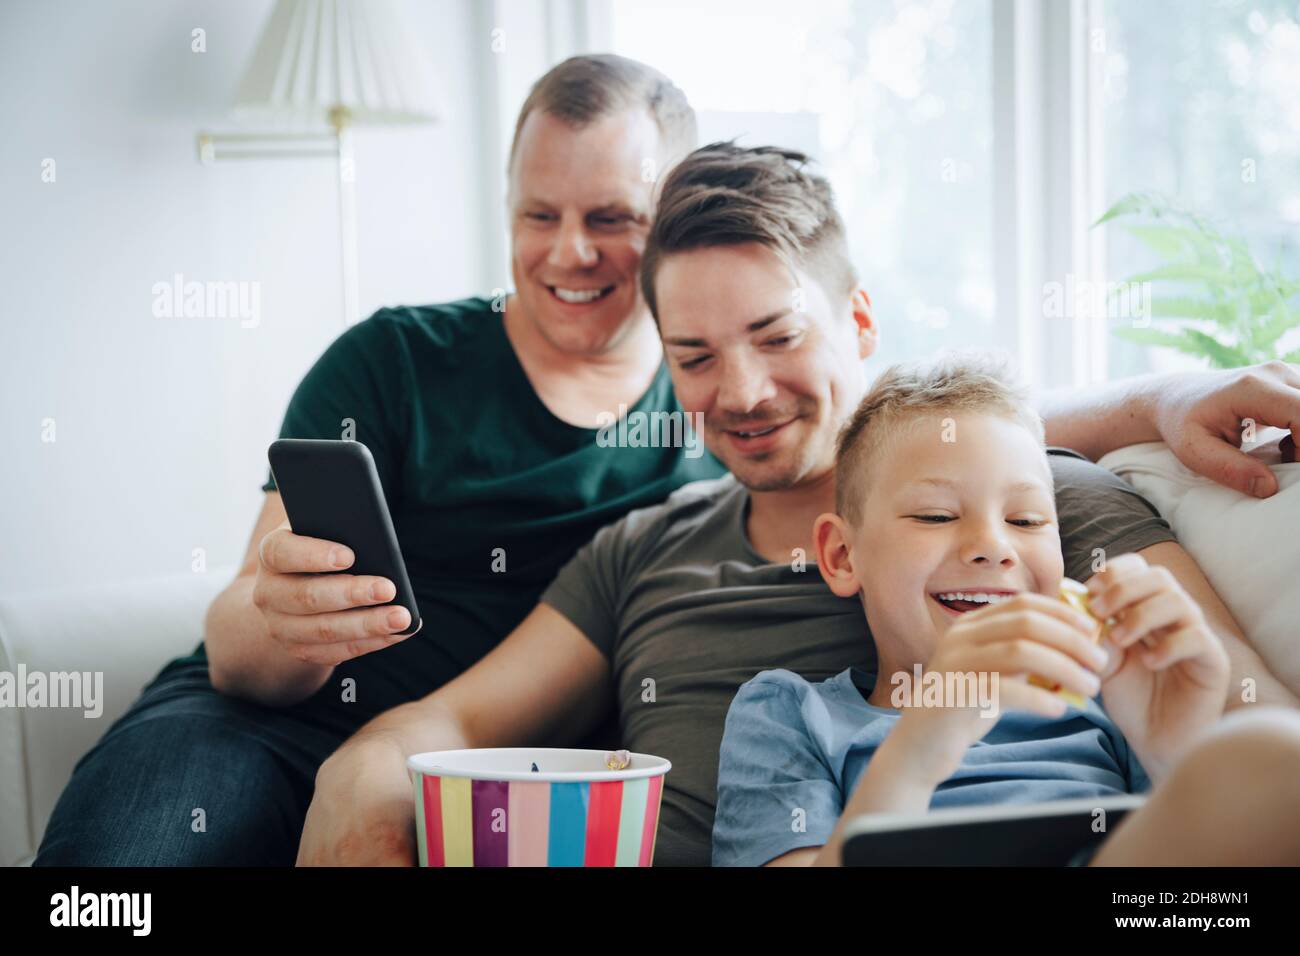 Smiling fathers and son using technology while eating popcorn on sofa at home Stock Photo